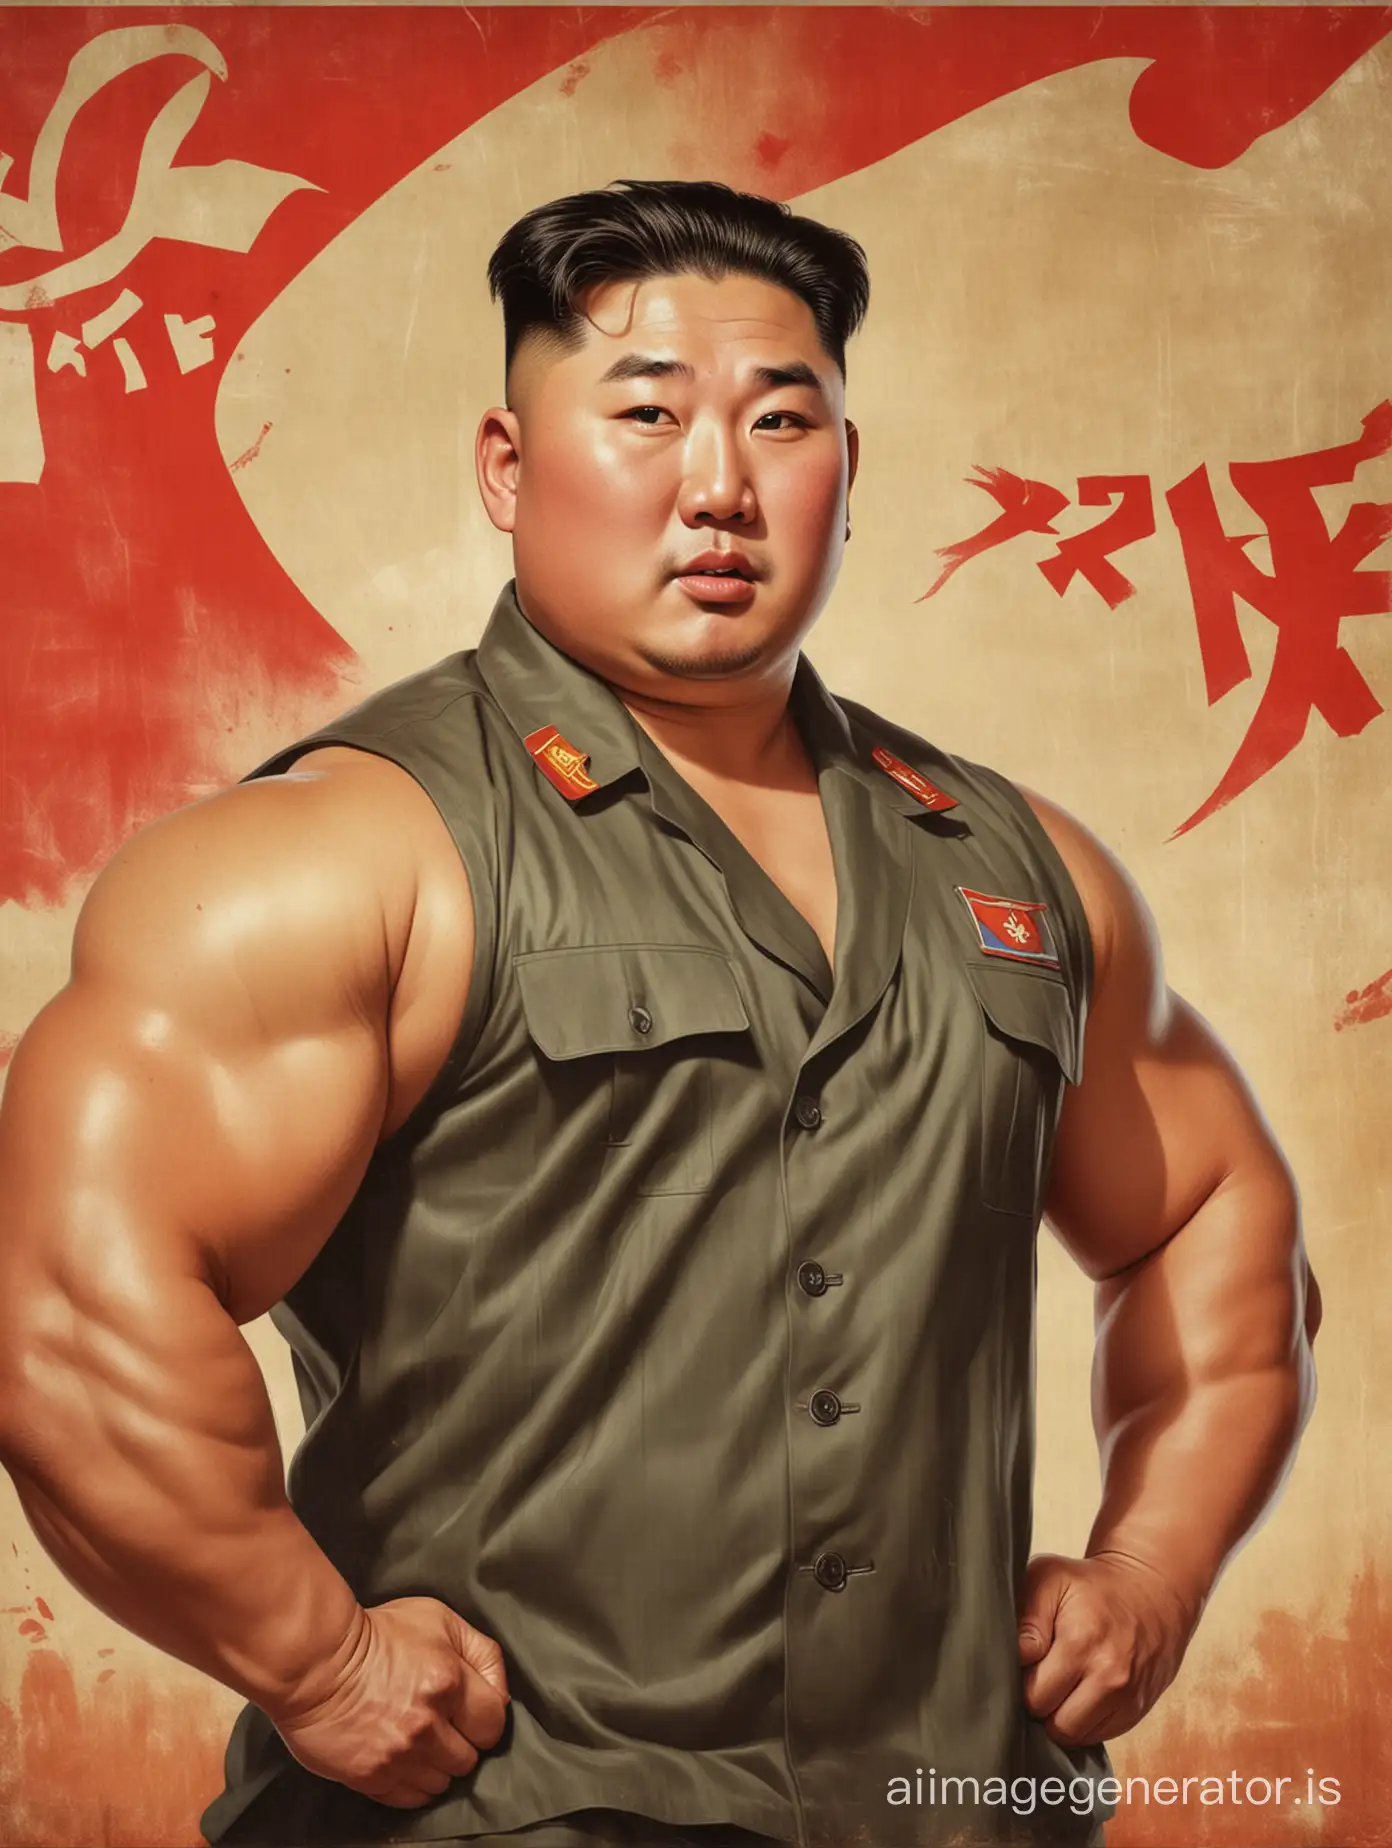 Portrait of Kim jong un as a muscly bodybuilder in the style of a vintage North Korean communist propaganda poster, pointing at the camera